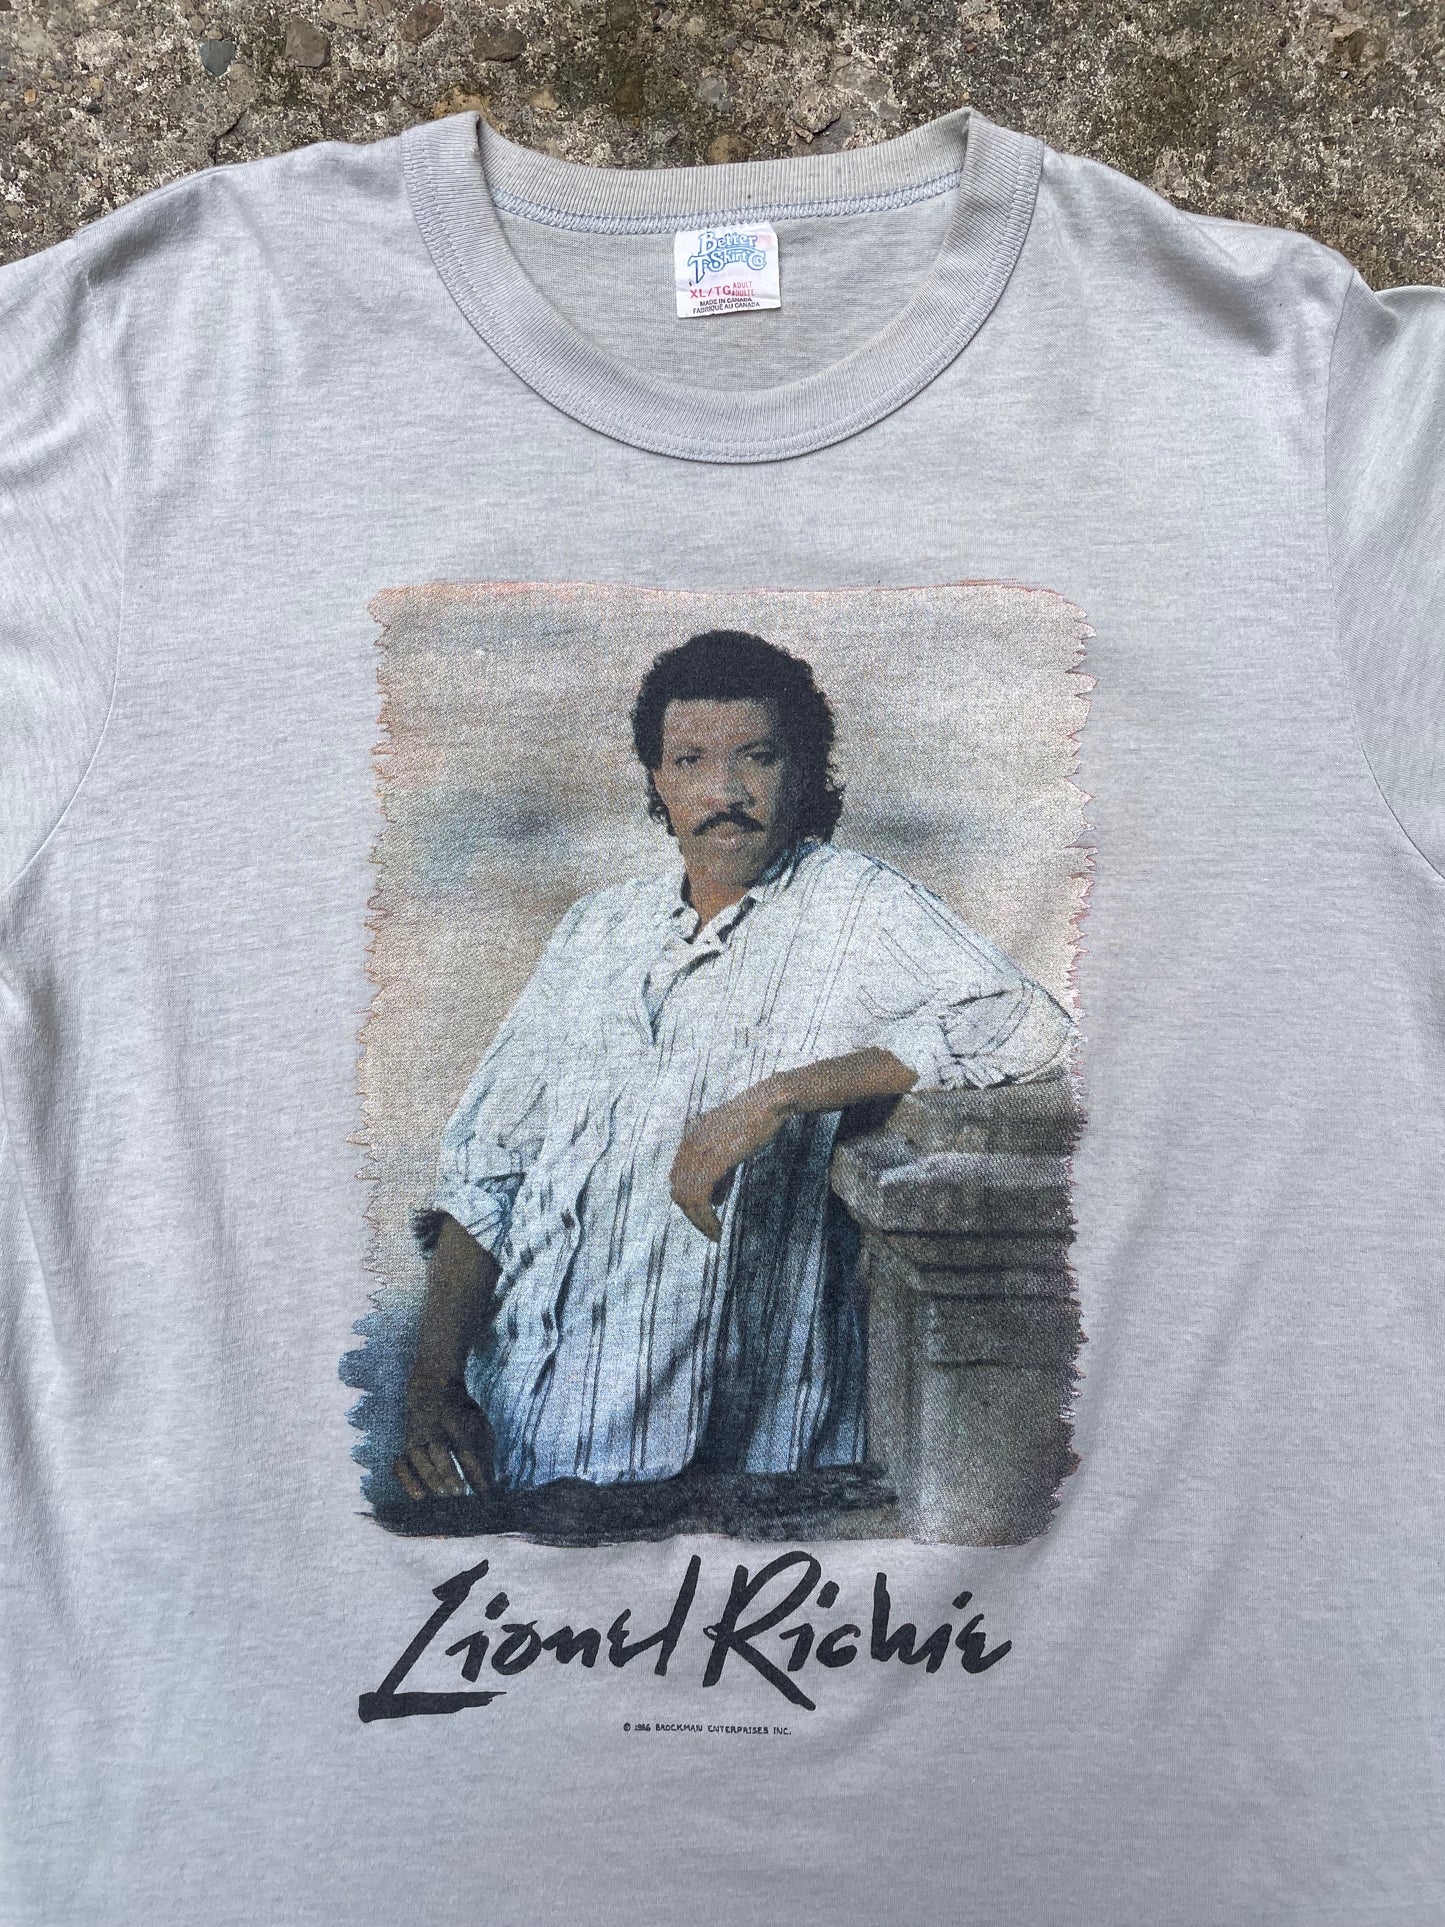 1986 Lionel Richie 'Say You Say Me' Ringer Band T-Shirt - L